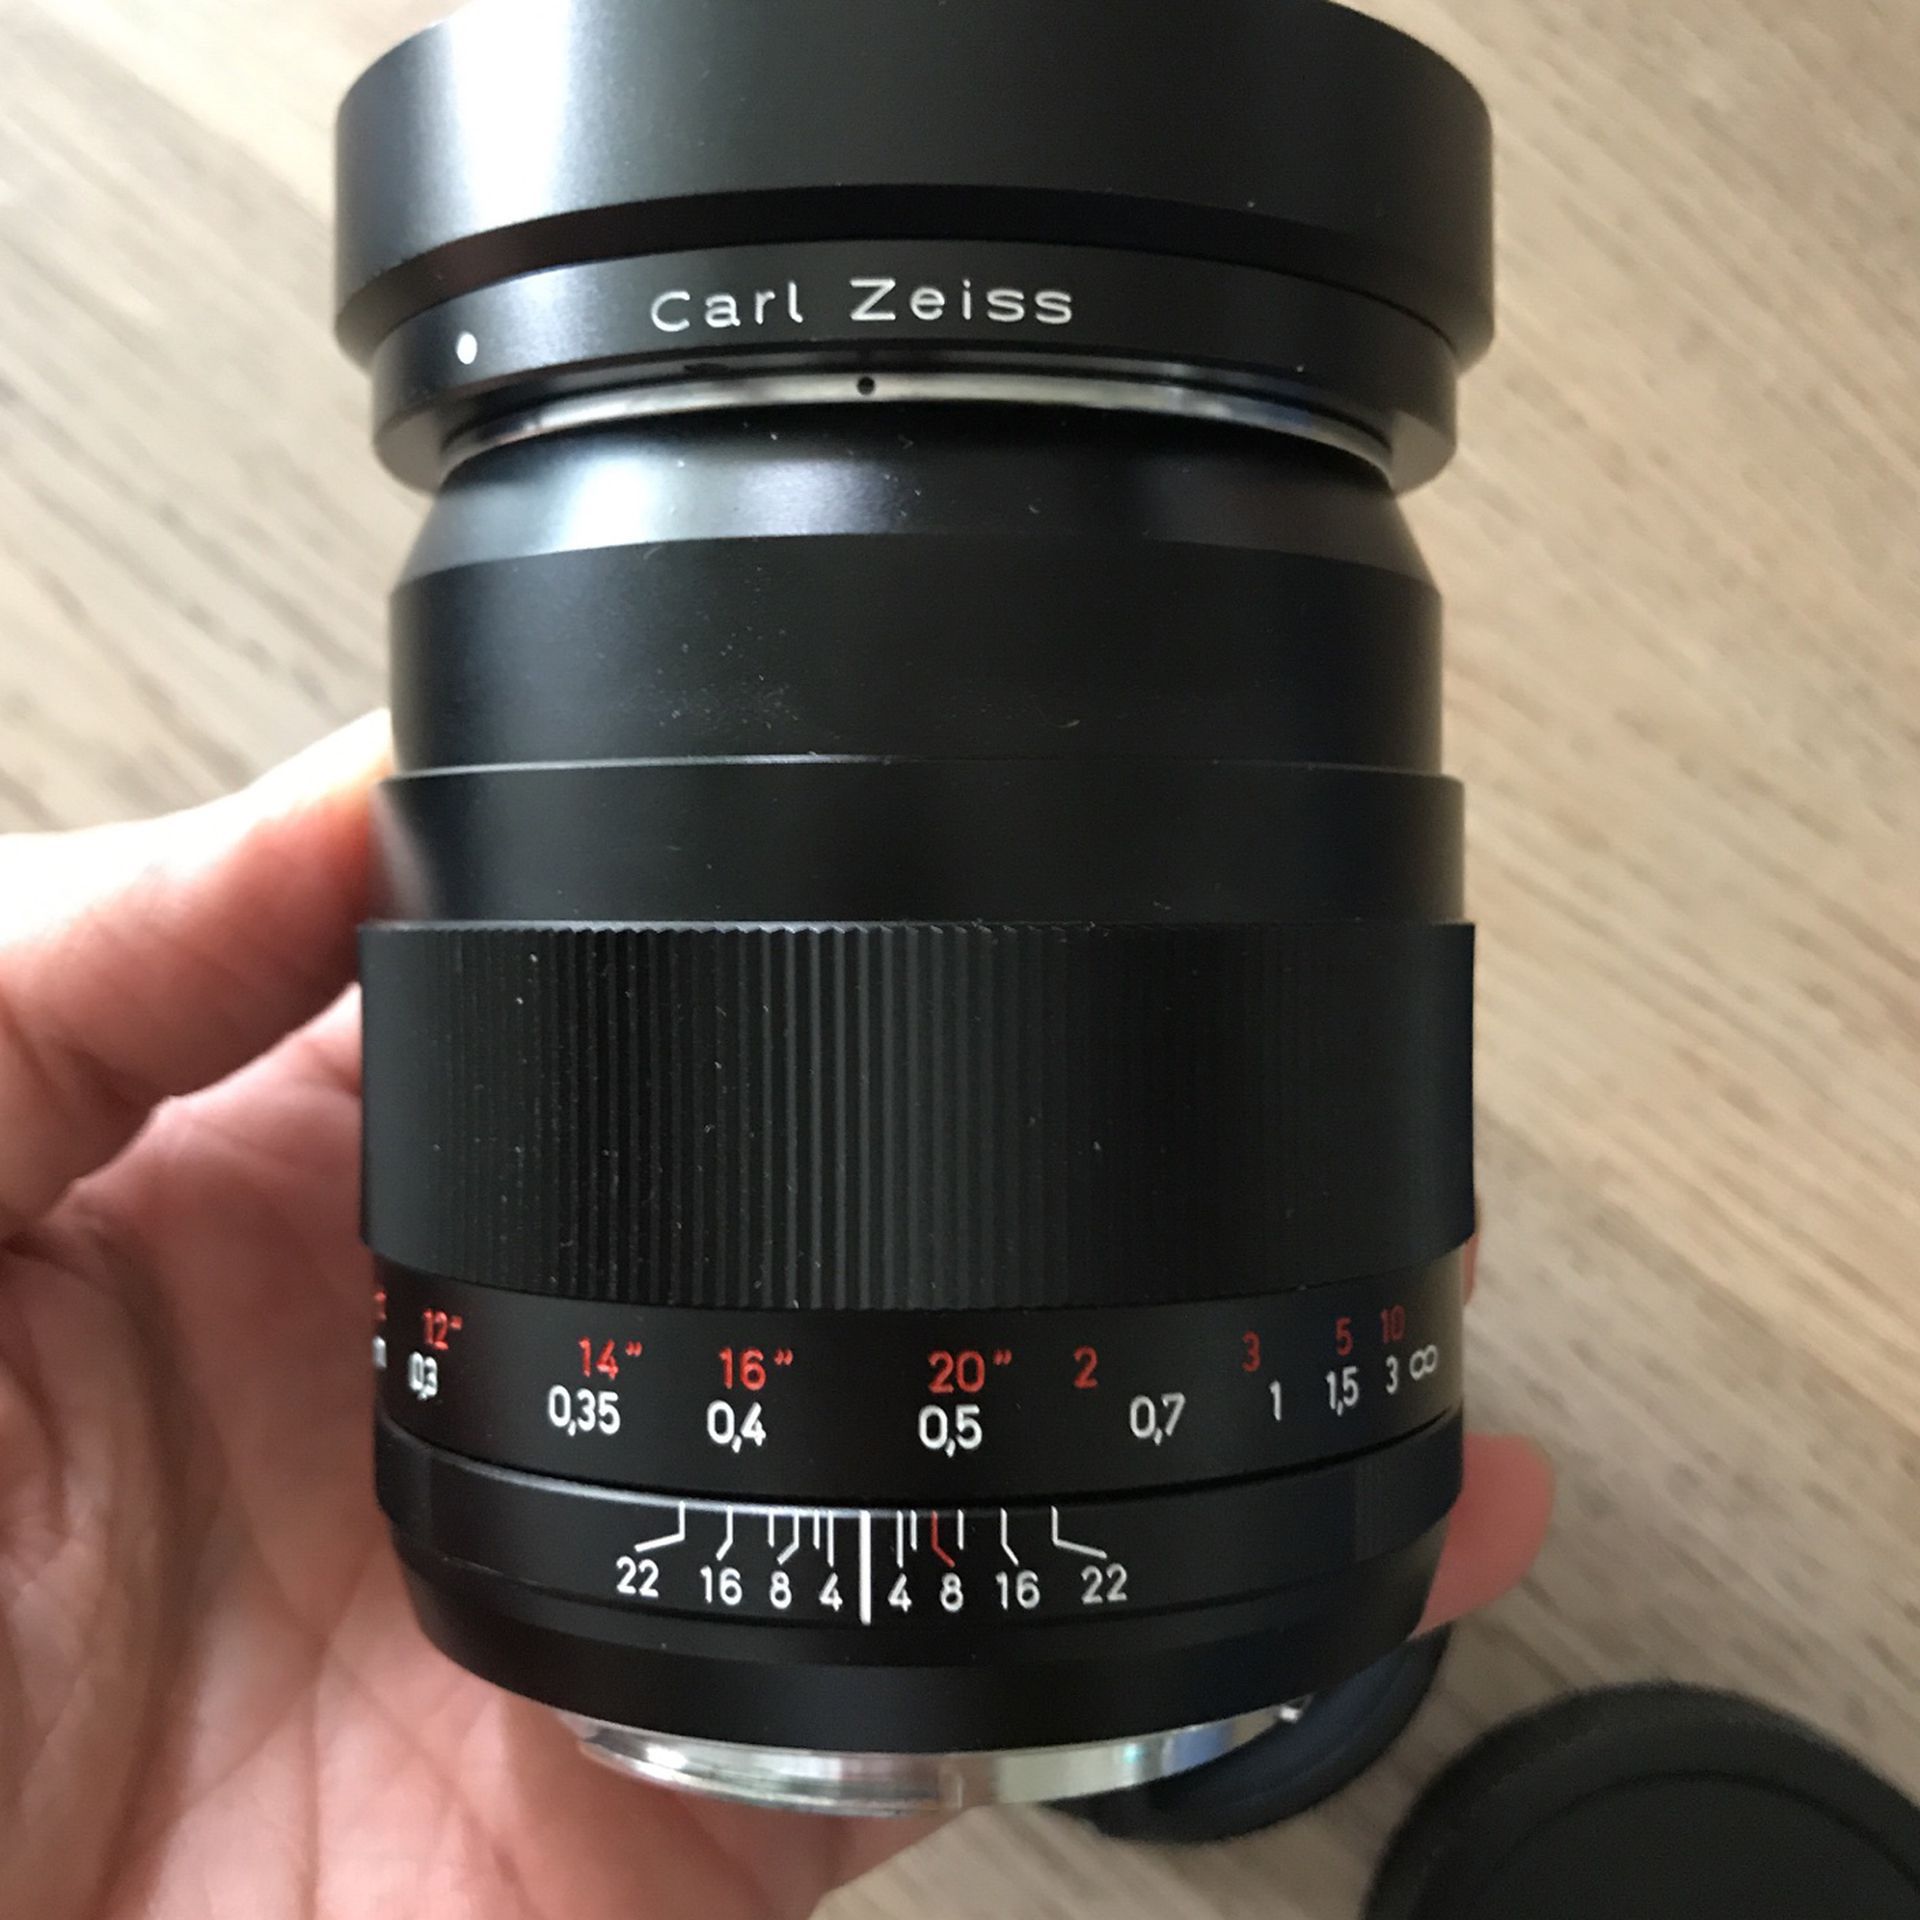 Carl Zeiss 35mm Distagon F/2 - Canon EF Mount